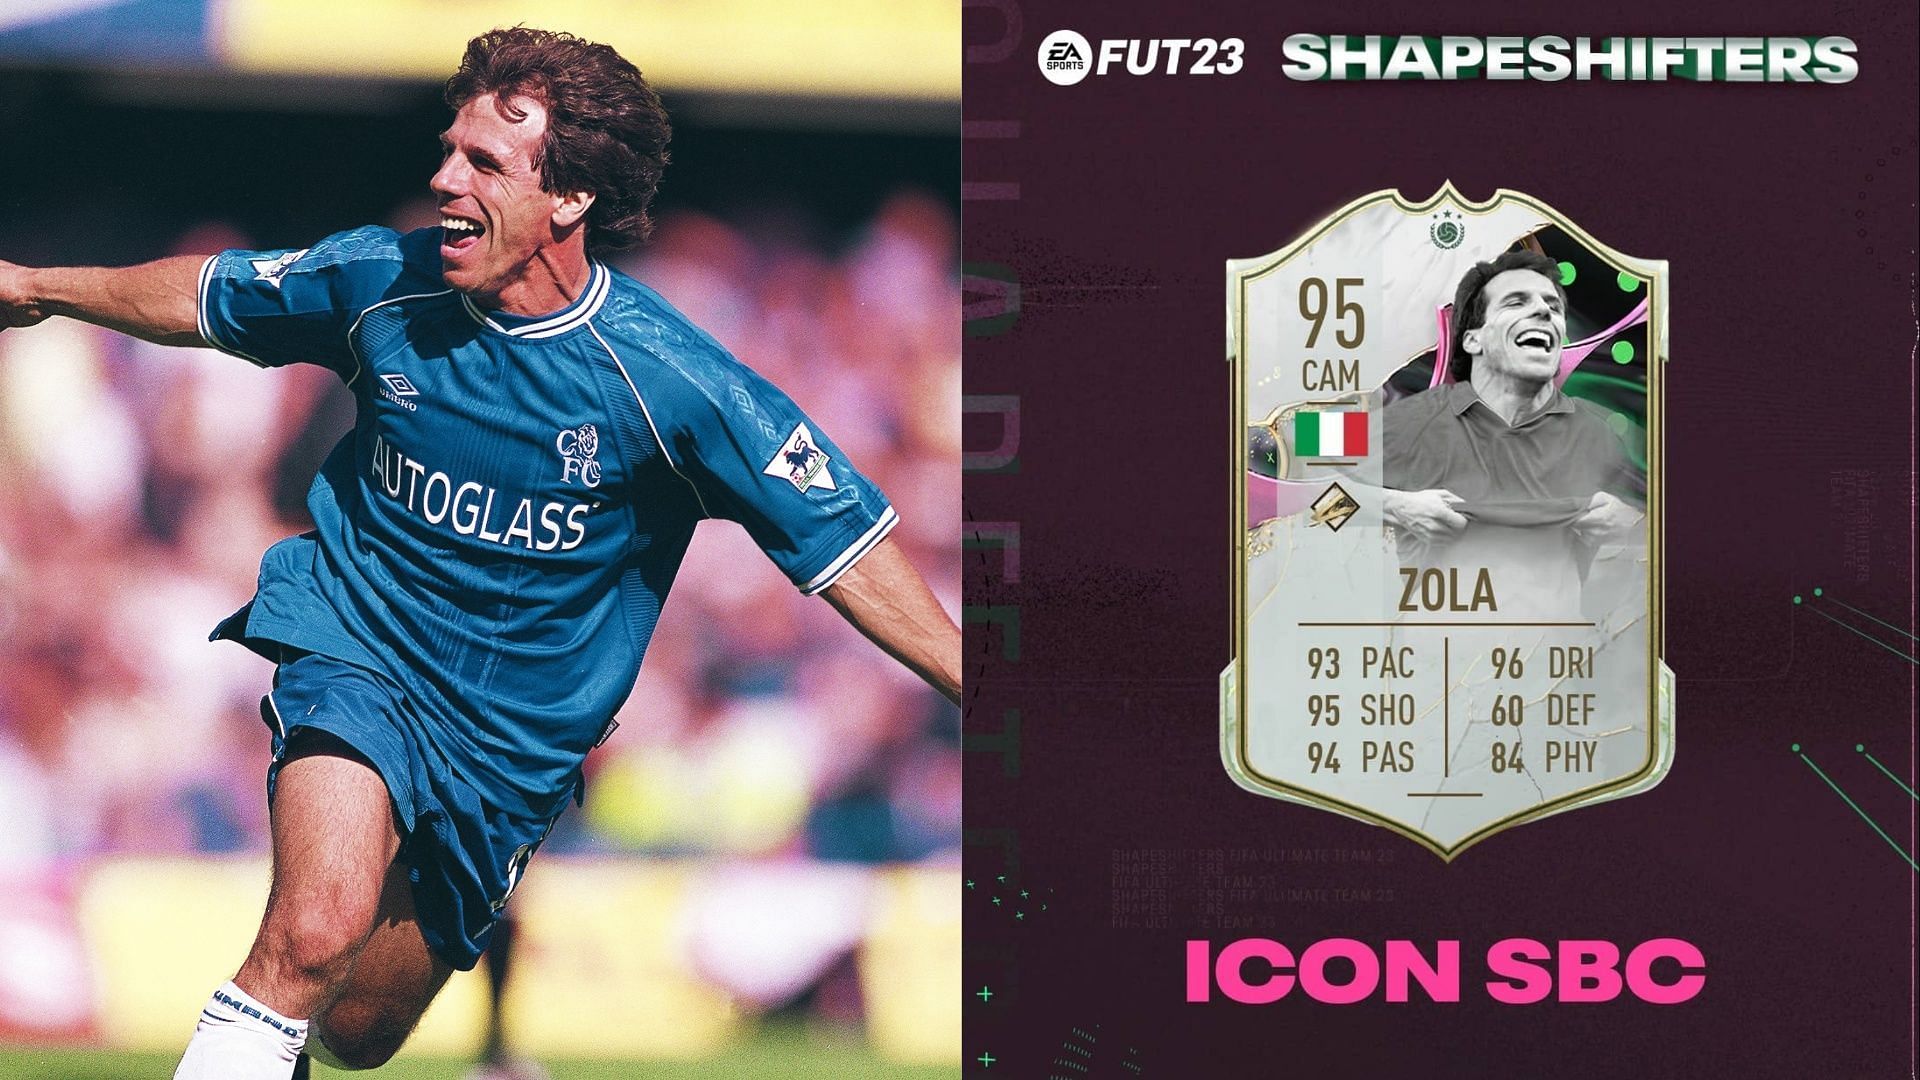 The Gianfranco Zola Shapeshifters SBC is now live in FIFA 23 (Images via Chelsea, EA Sports)